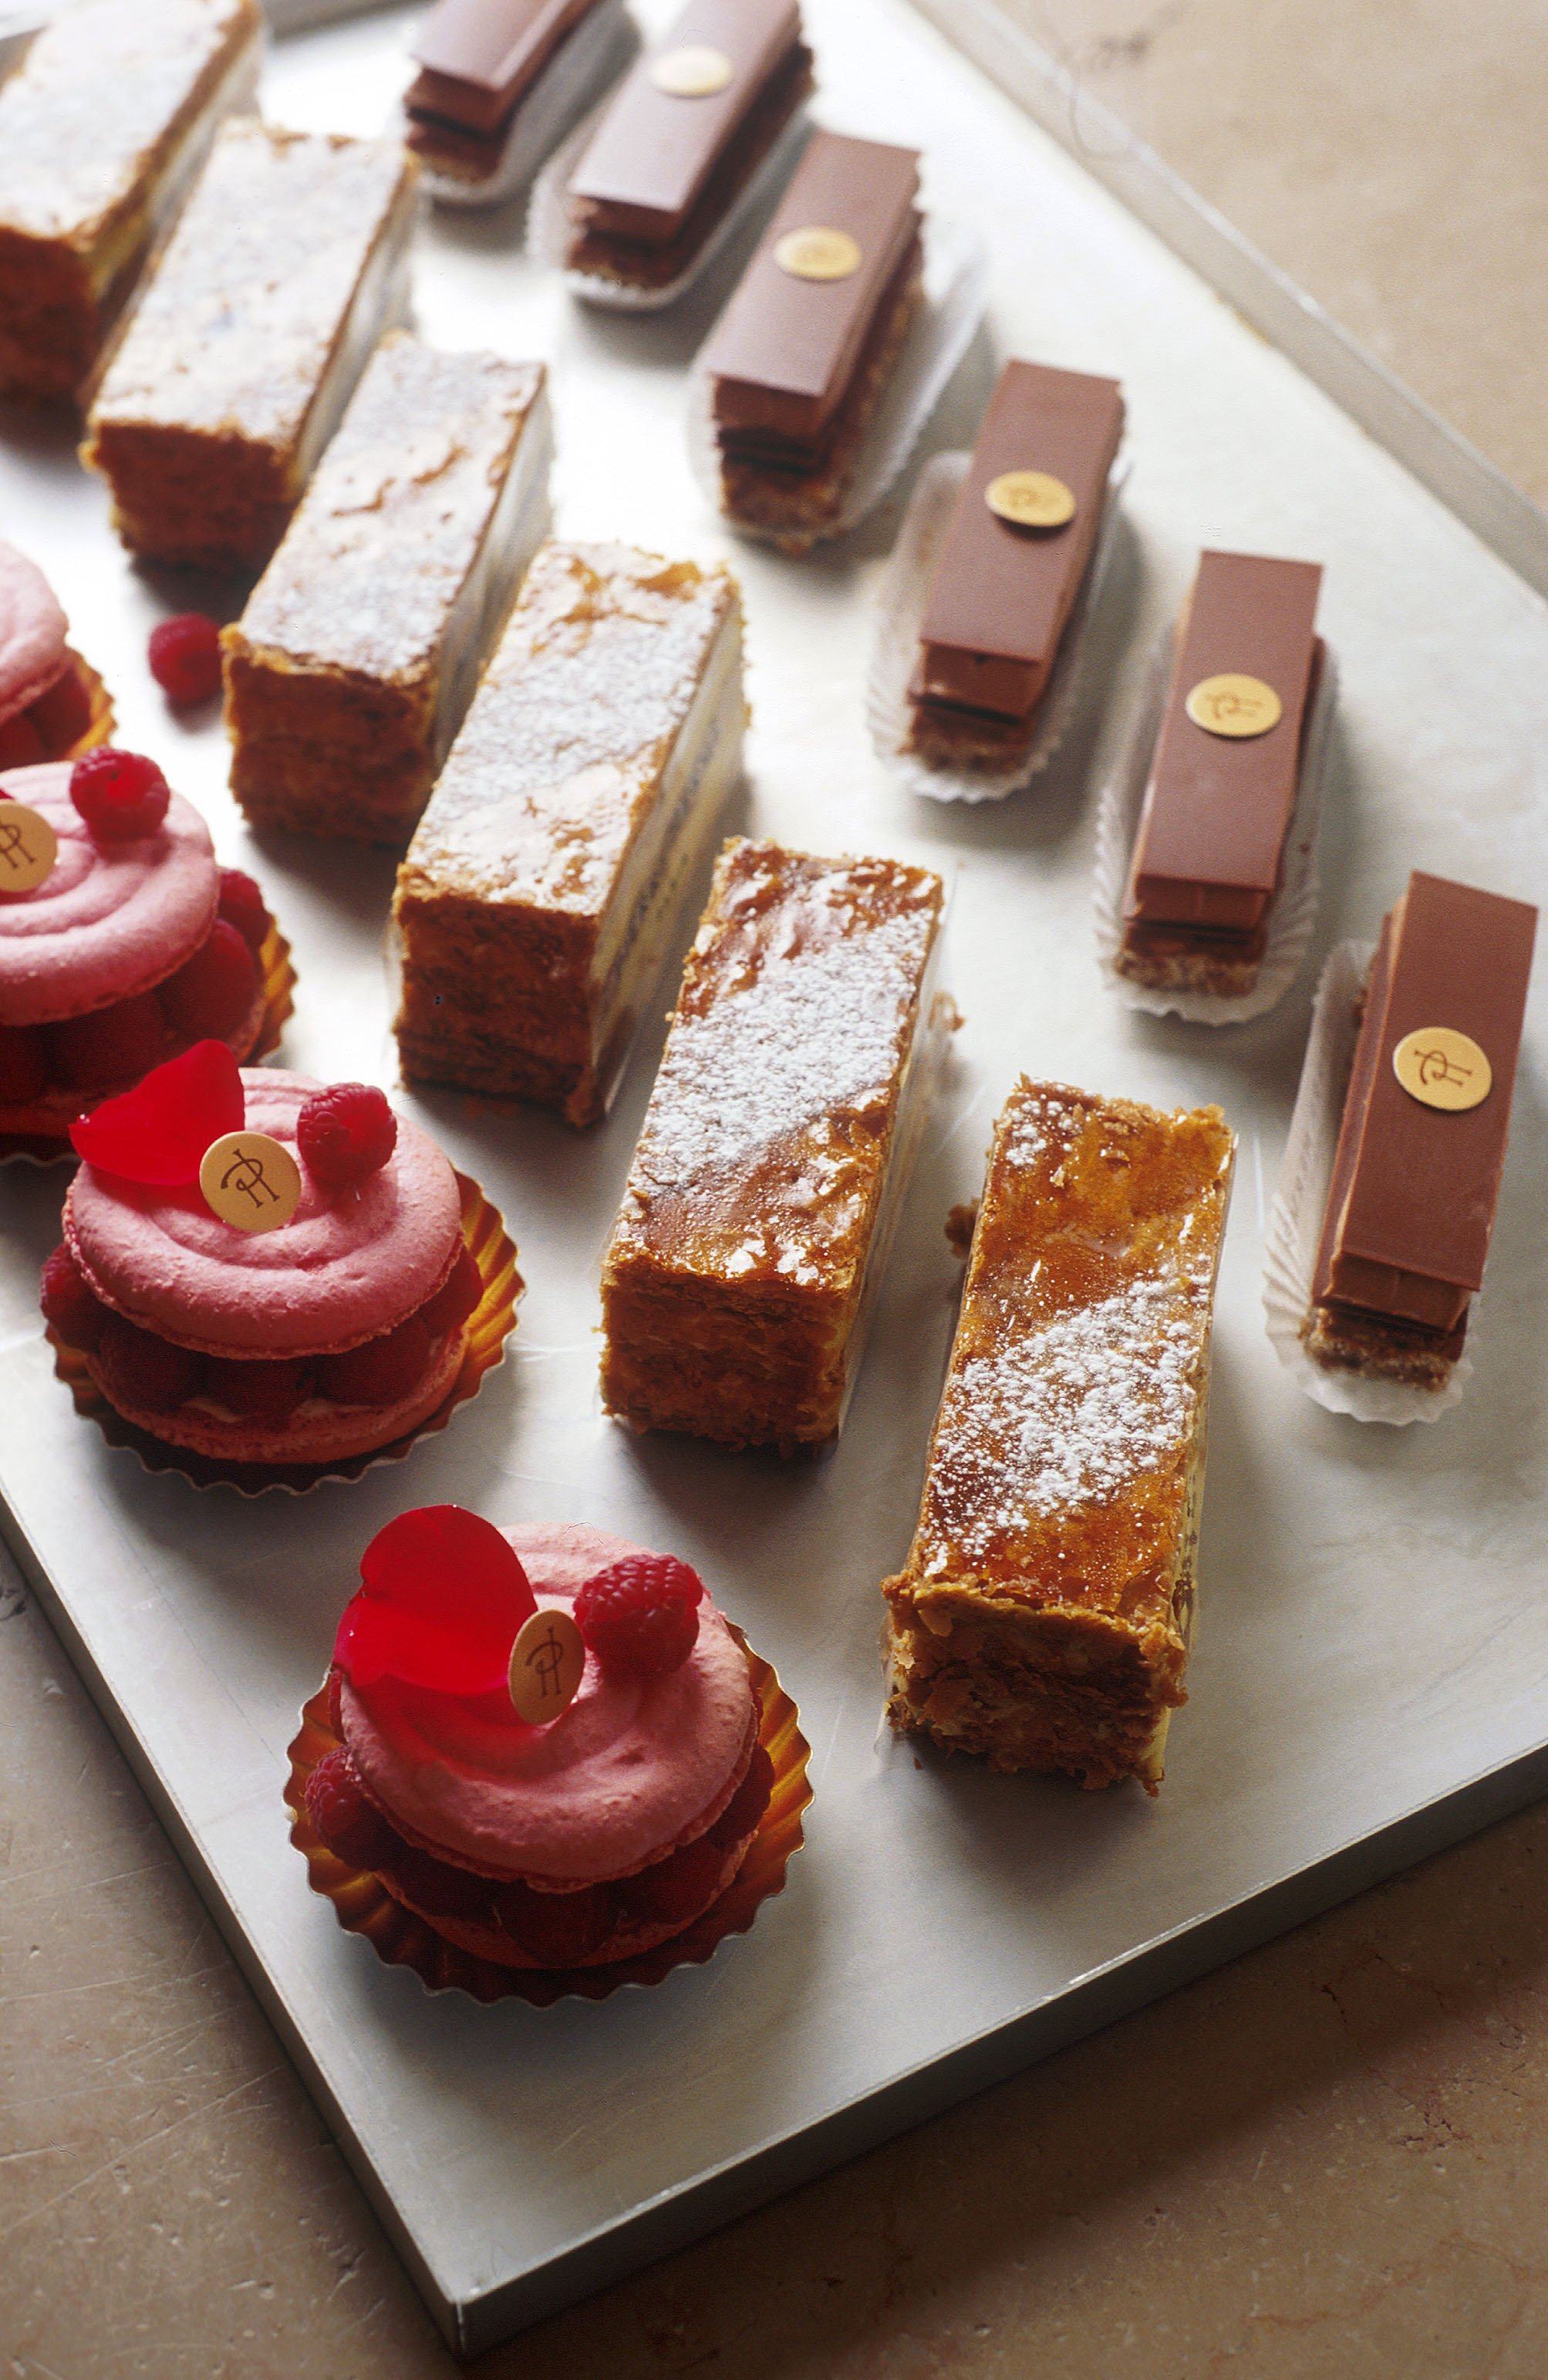 Pastries by French pastry chef Pierre Hermé. His book La Pâtisserie de Pierre Hermé will be one that you turn to again and again, because the basics are so good. Photo: Getty Images